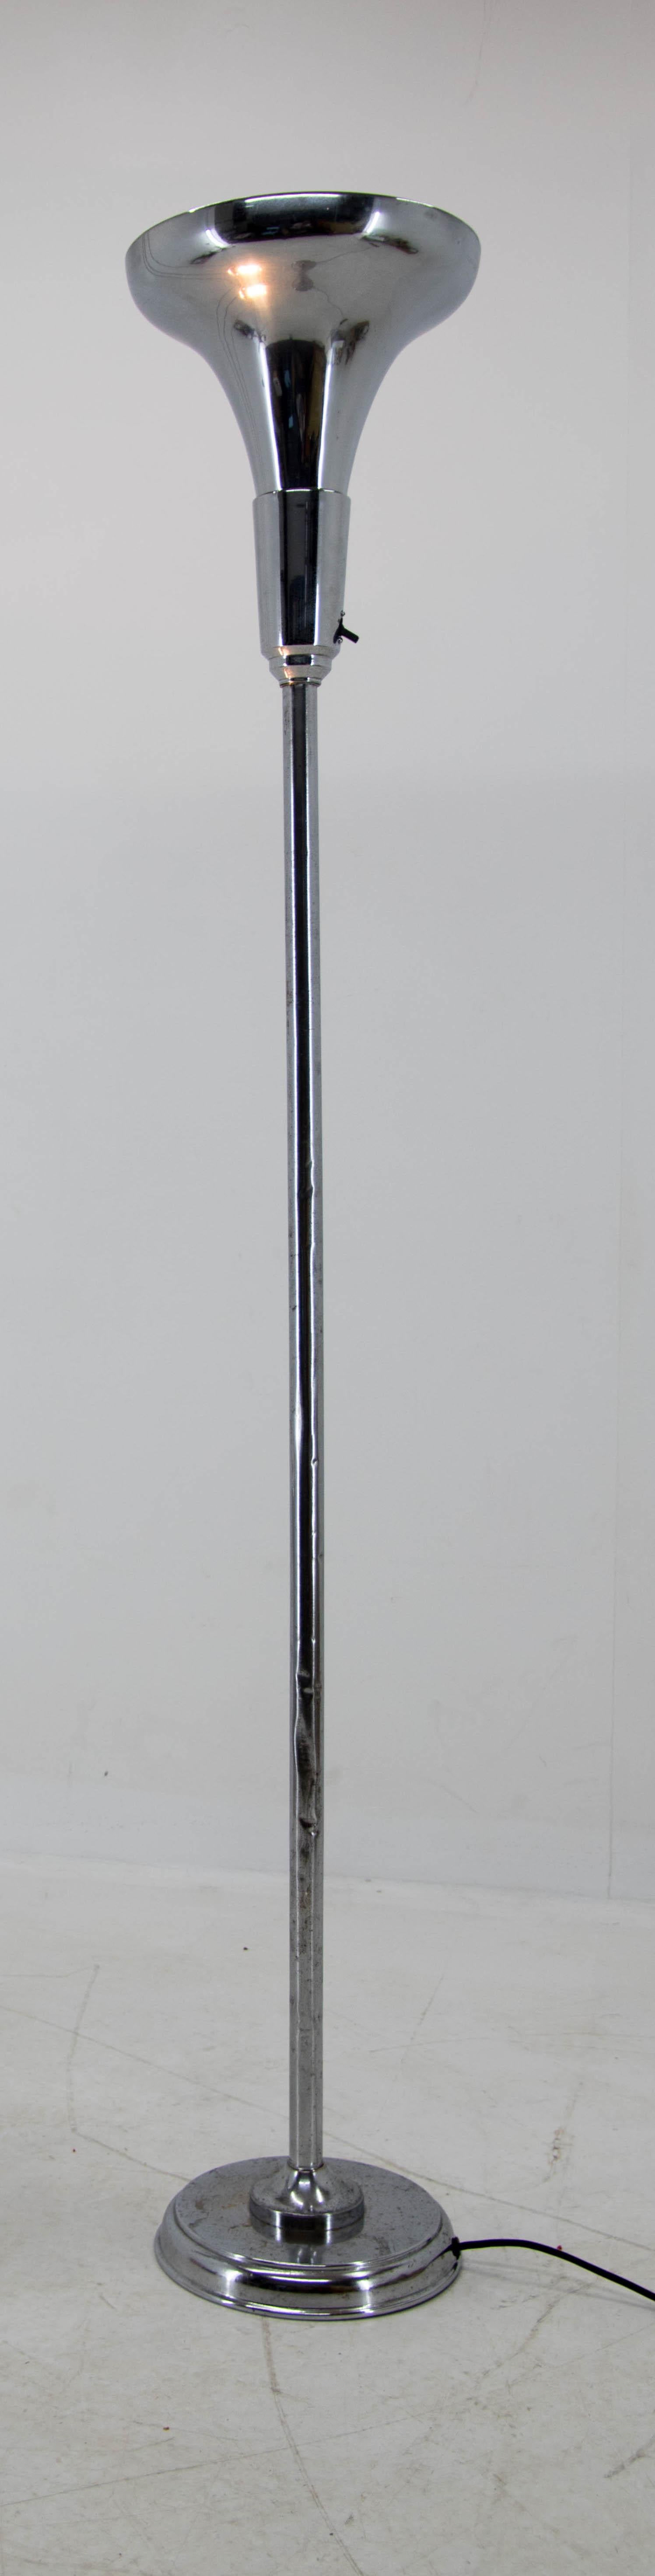 Rare Bauhaus floor lamp by Luminator.
Beautiful simple design
Chrome with age patina - polished
Original switch
New wiring
Original E40 socket and original adapter to E25-E27 bulb
Shipping to US on request.
  